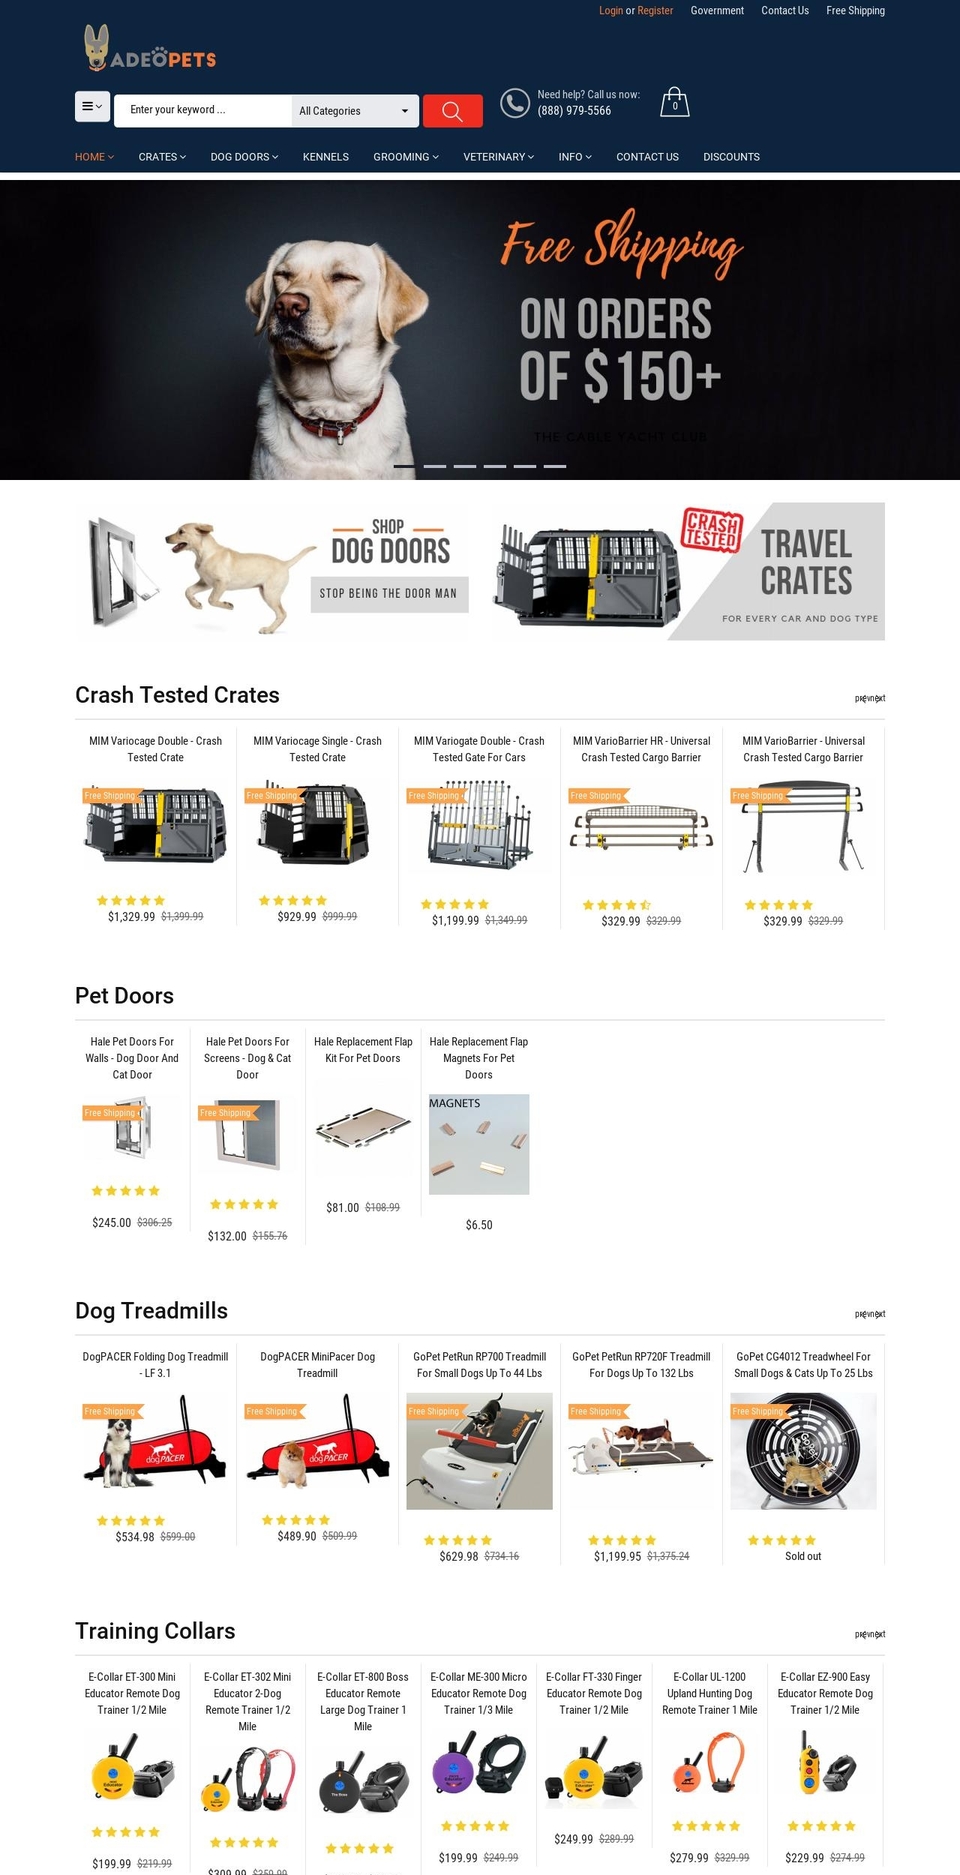 Maxmin Shopify theme site example adeopets.com